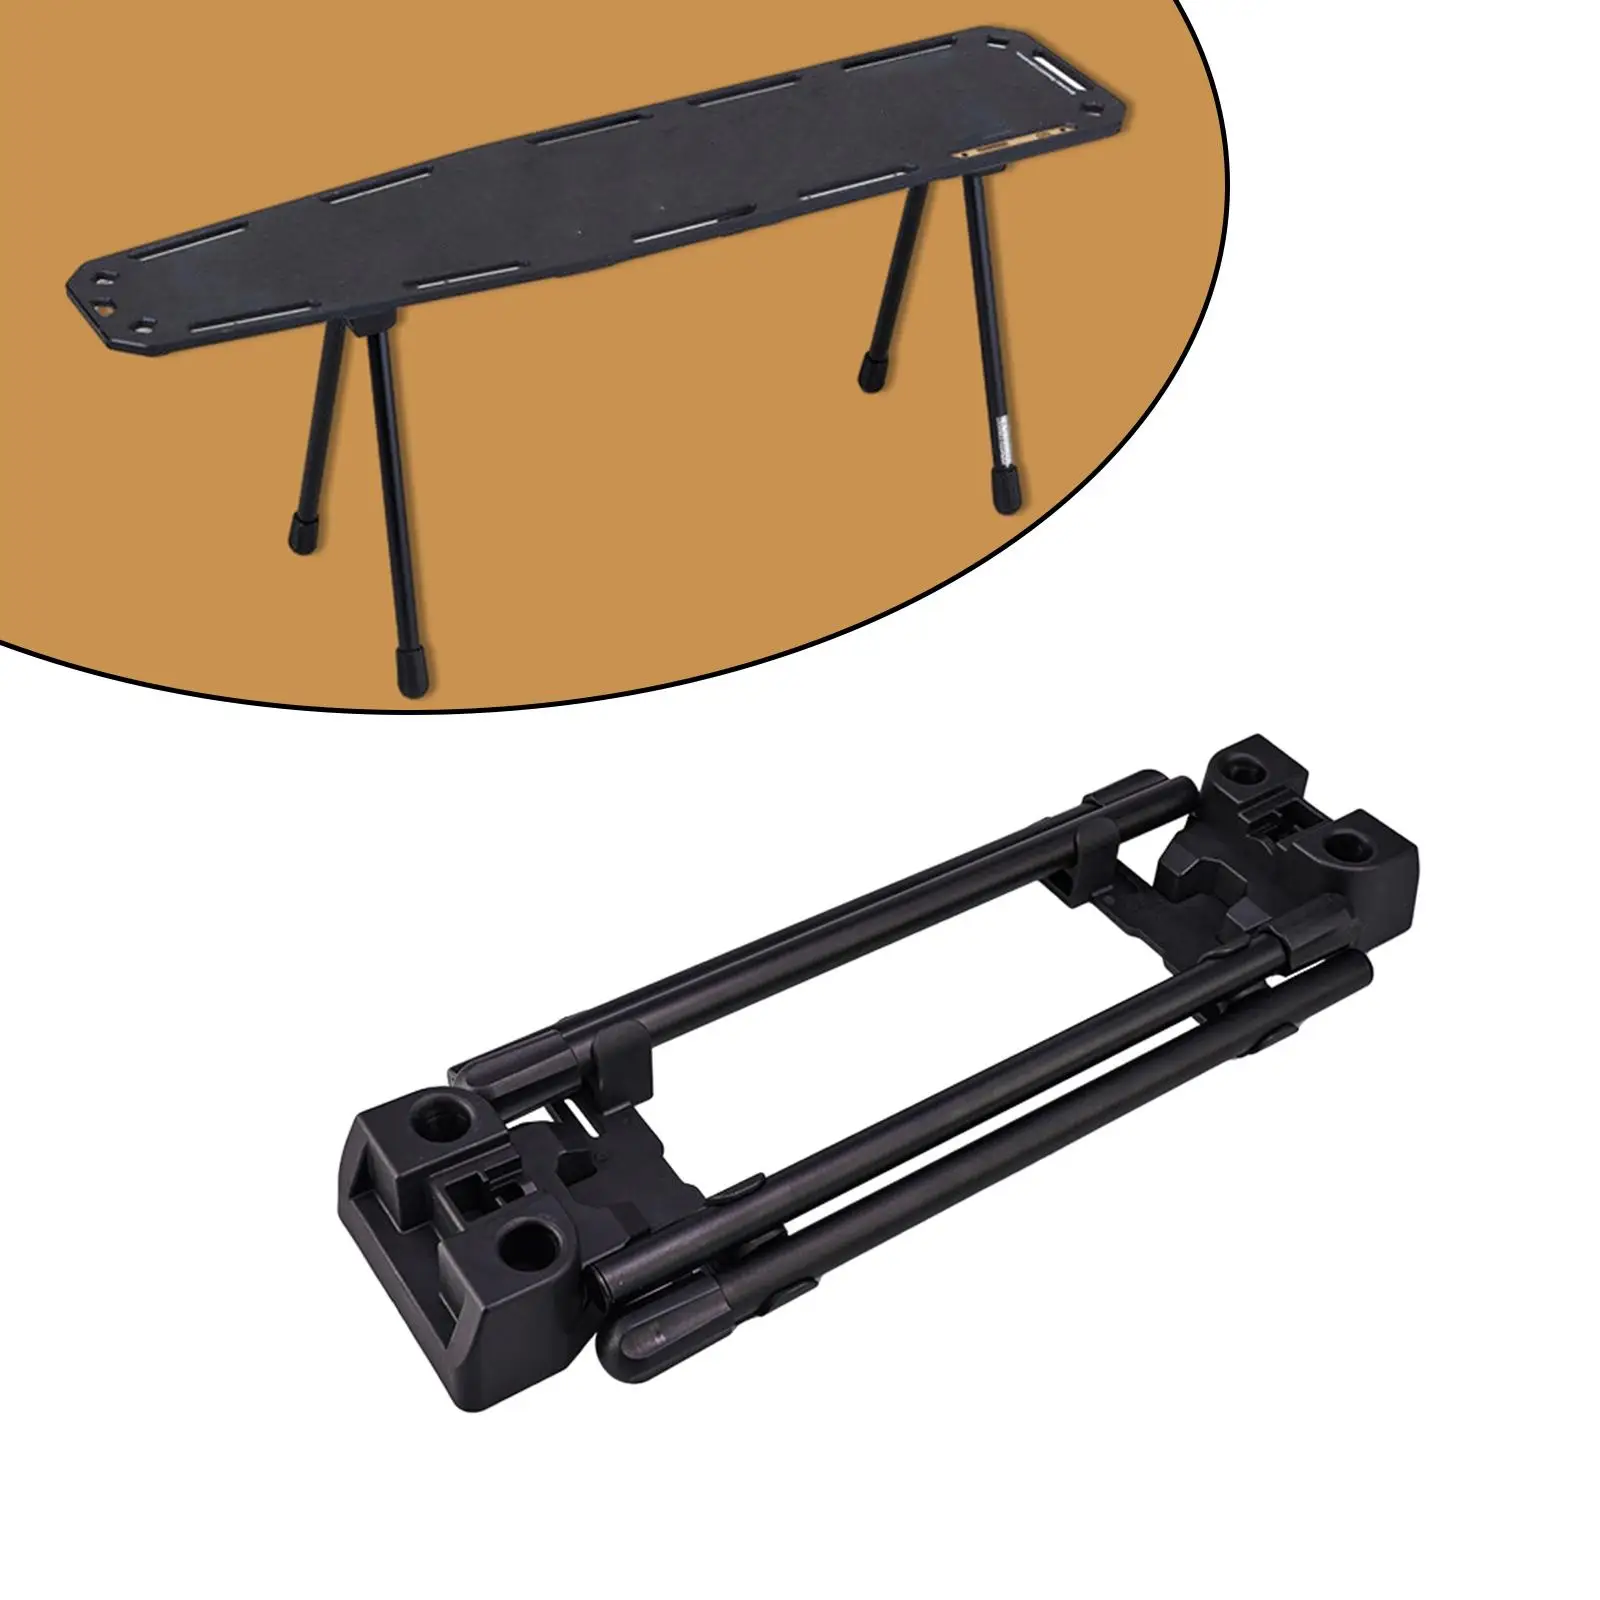 2 Pieces Folding Table Legs Modern DIY Table Support Legs Furniture Legs for Laptop Desk Living Room Bench Office Camping Table